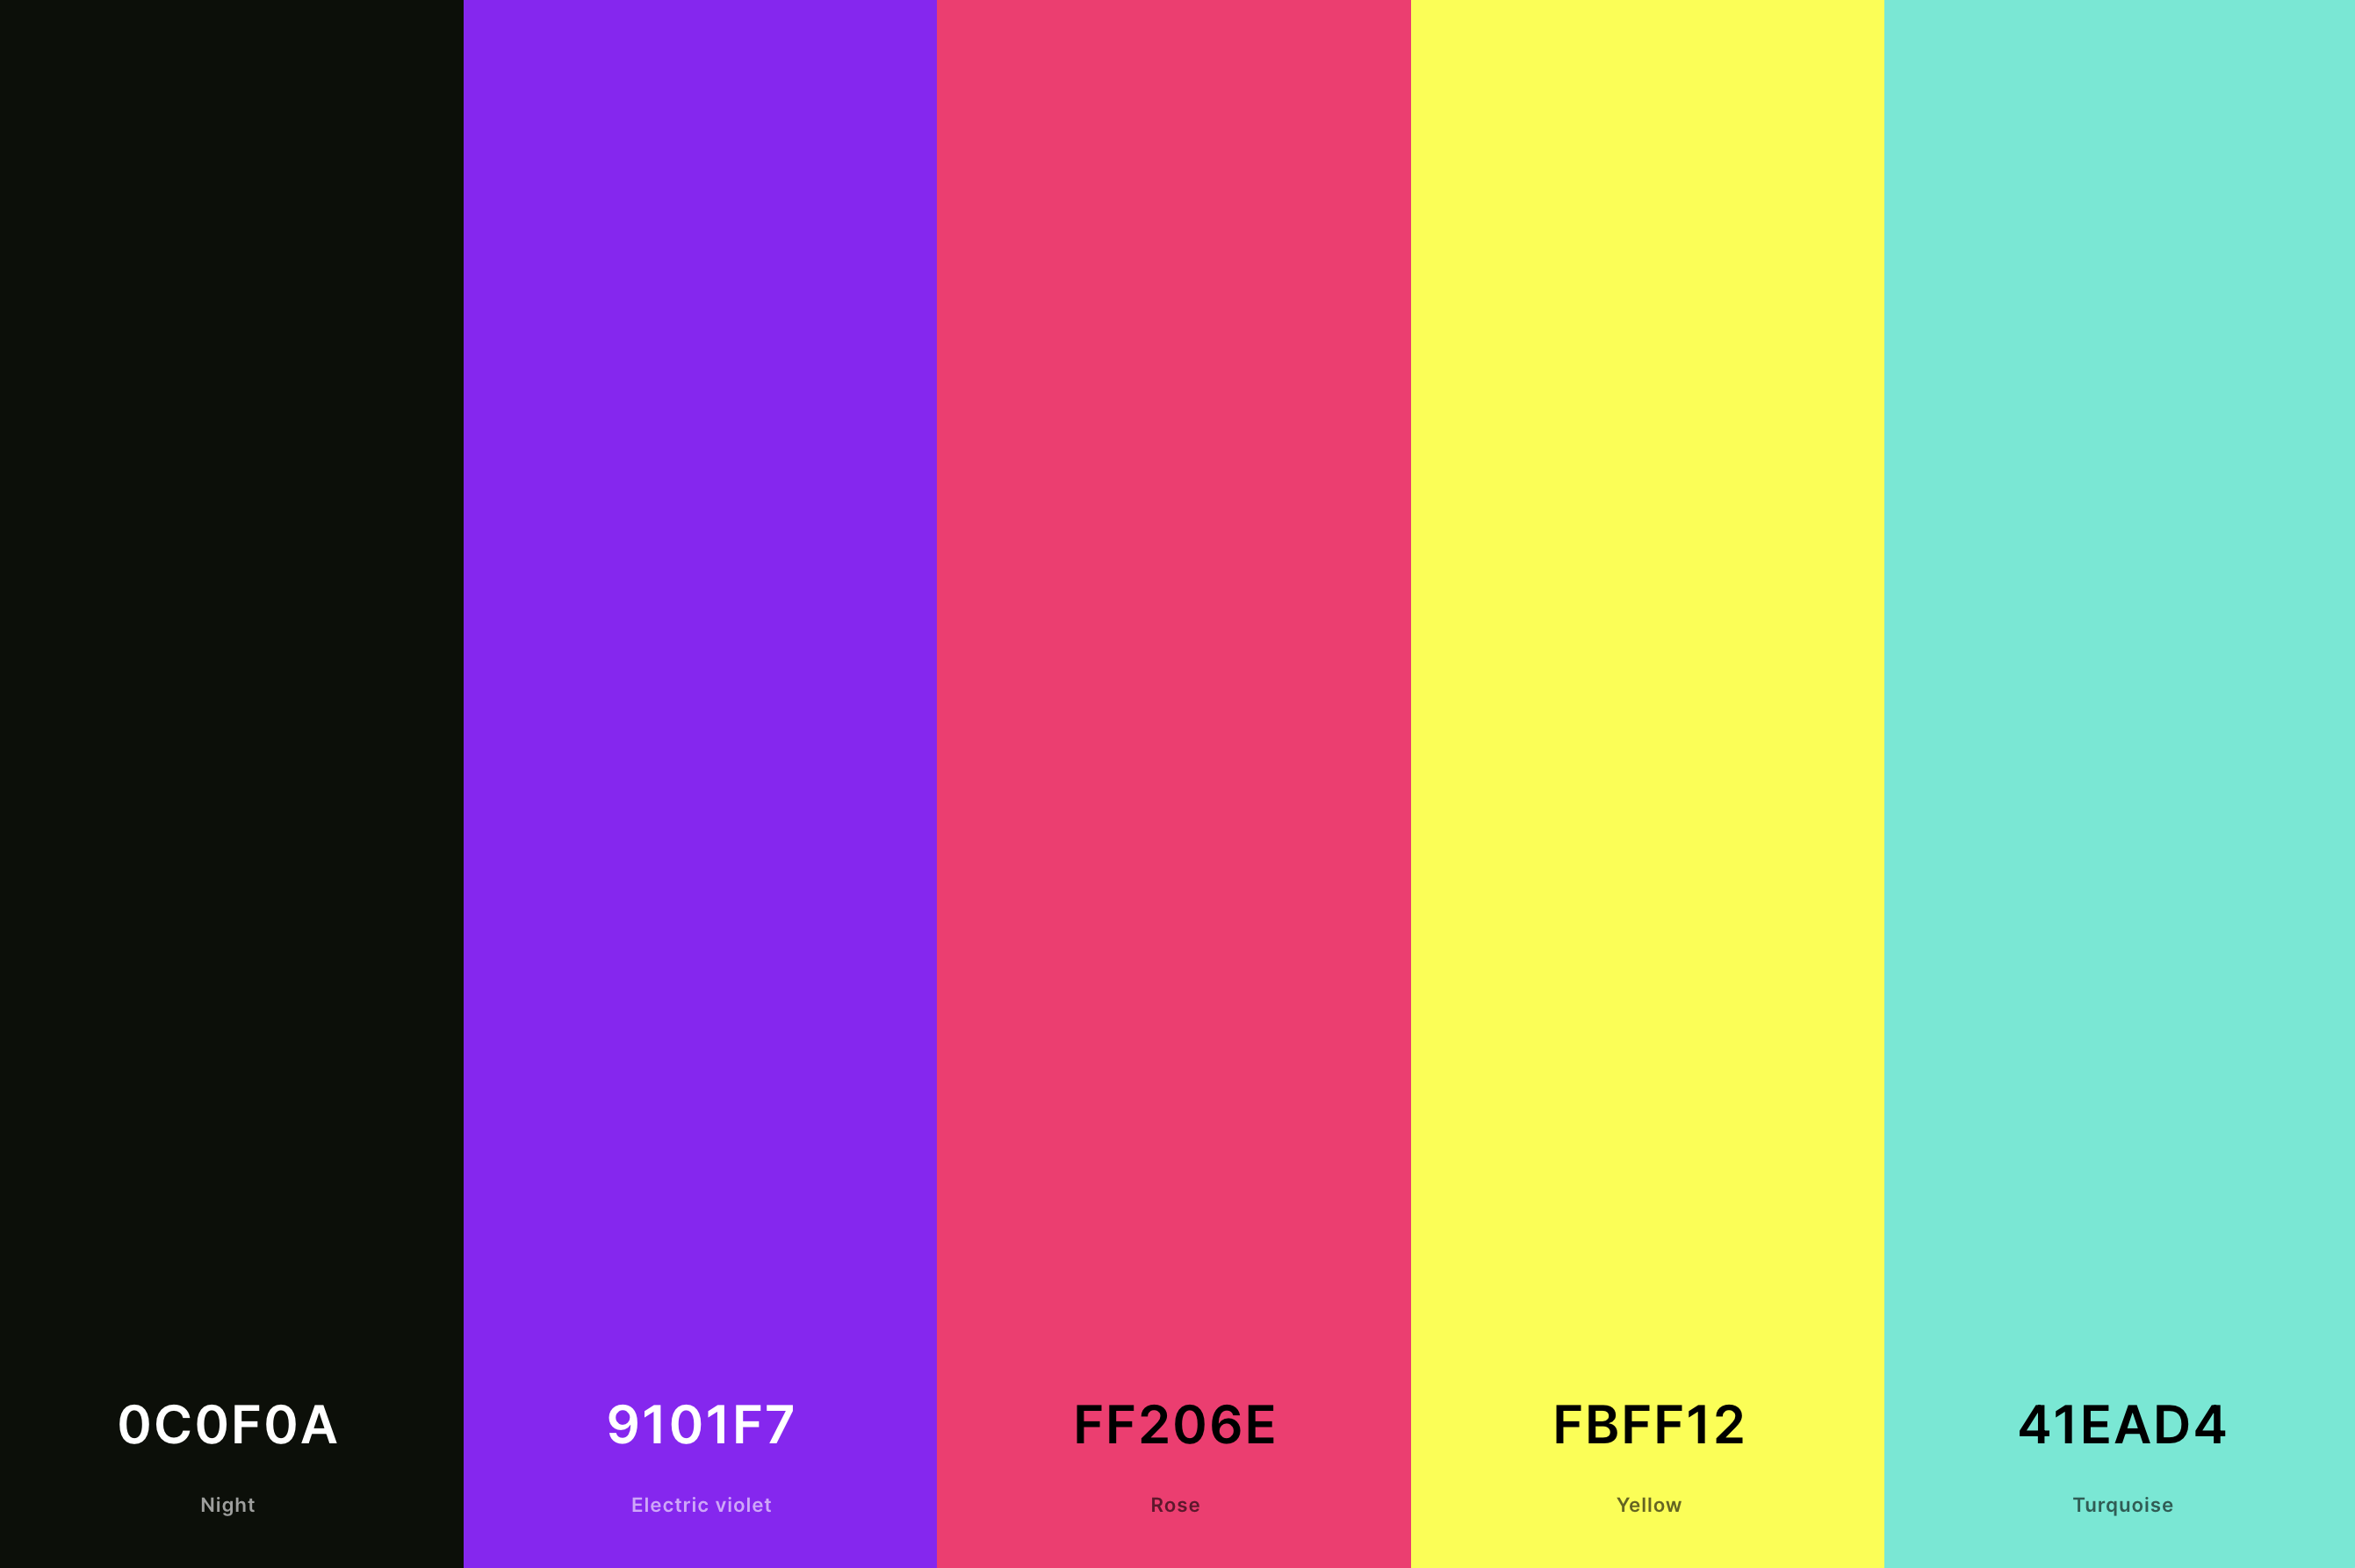 25. Aesthetic Neon Color Palette Color Palette with Night (Hex #0C0F0A) + Electric Violet (Hex #9101F7) + Rose (Hex #FF206E) + Yellow (Hex #FBFF12) + Turquoise (Hex #41EAD4) Color Palette with Hex Codes